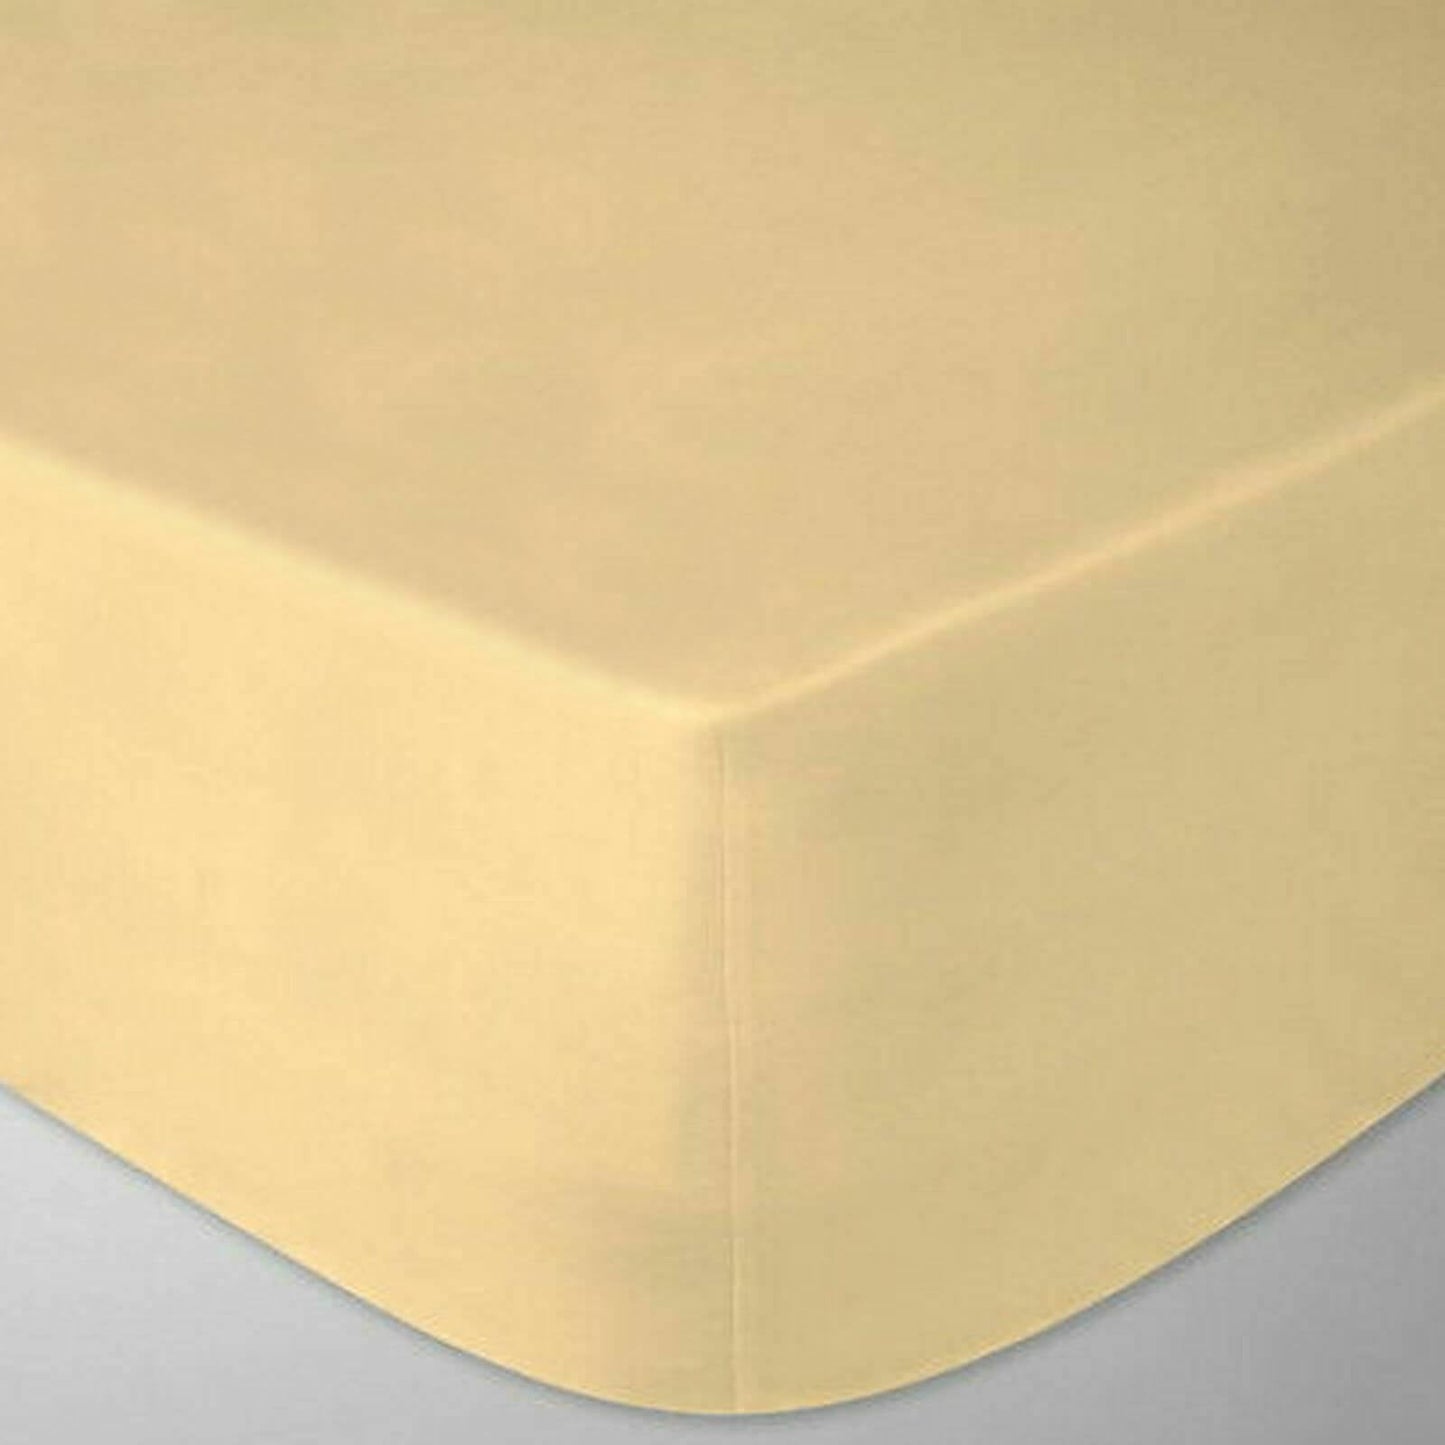 Egyptian Percale Hotel Quality 200 Thread Count Fitted Bed Sheet - TheComfortshop.co.ukBed Sheets0721718962328thecomfortshopTheComfortshop.co.ukLatte T200 Fitted Sheet SingleLatteSingleEgyptian Percale Hotel Quality 200 Thread Count Fitted Bed Sheet - TheComfortshop.co.uk